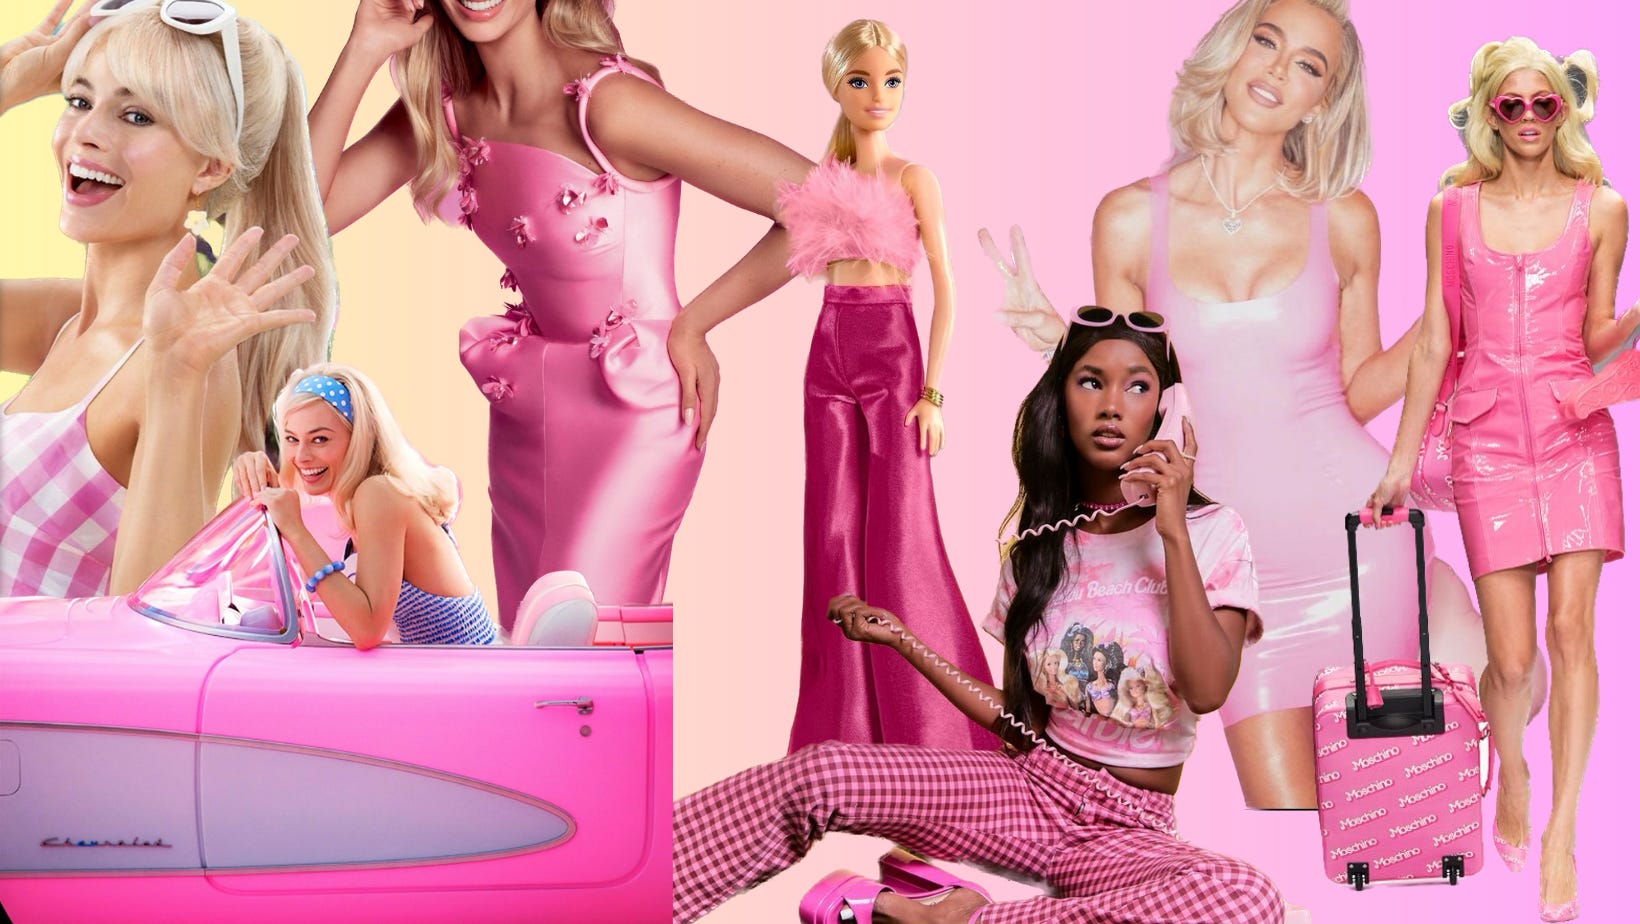 Barbie brand collaborations and merchandise for the Barbie Girl aesthetic